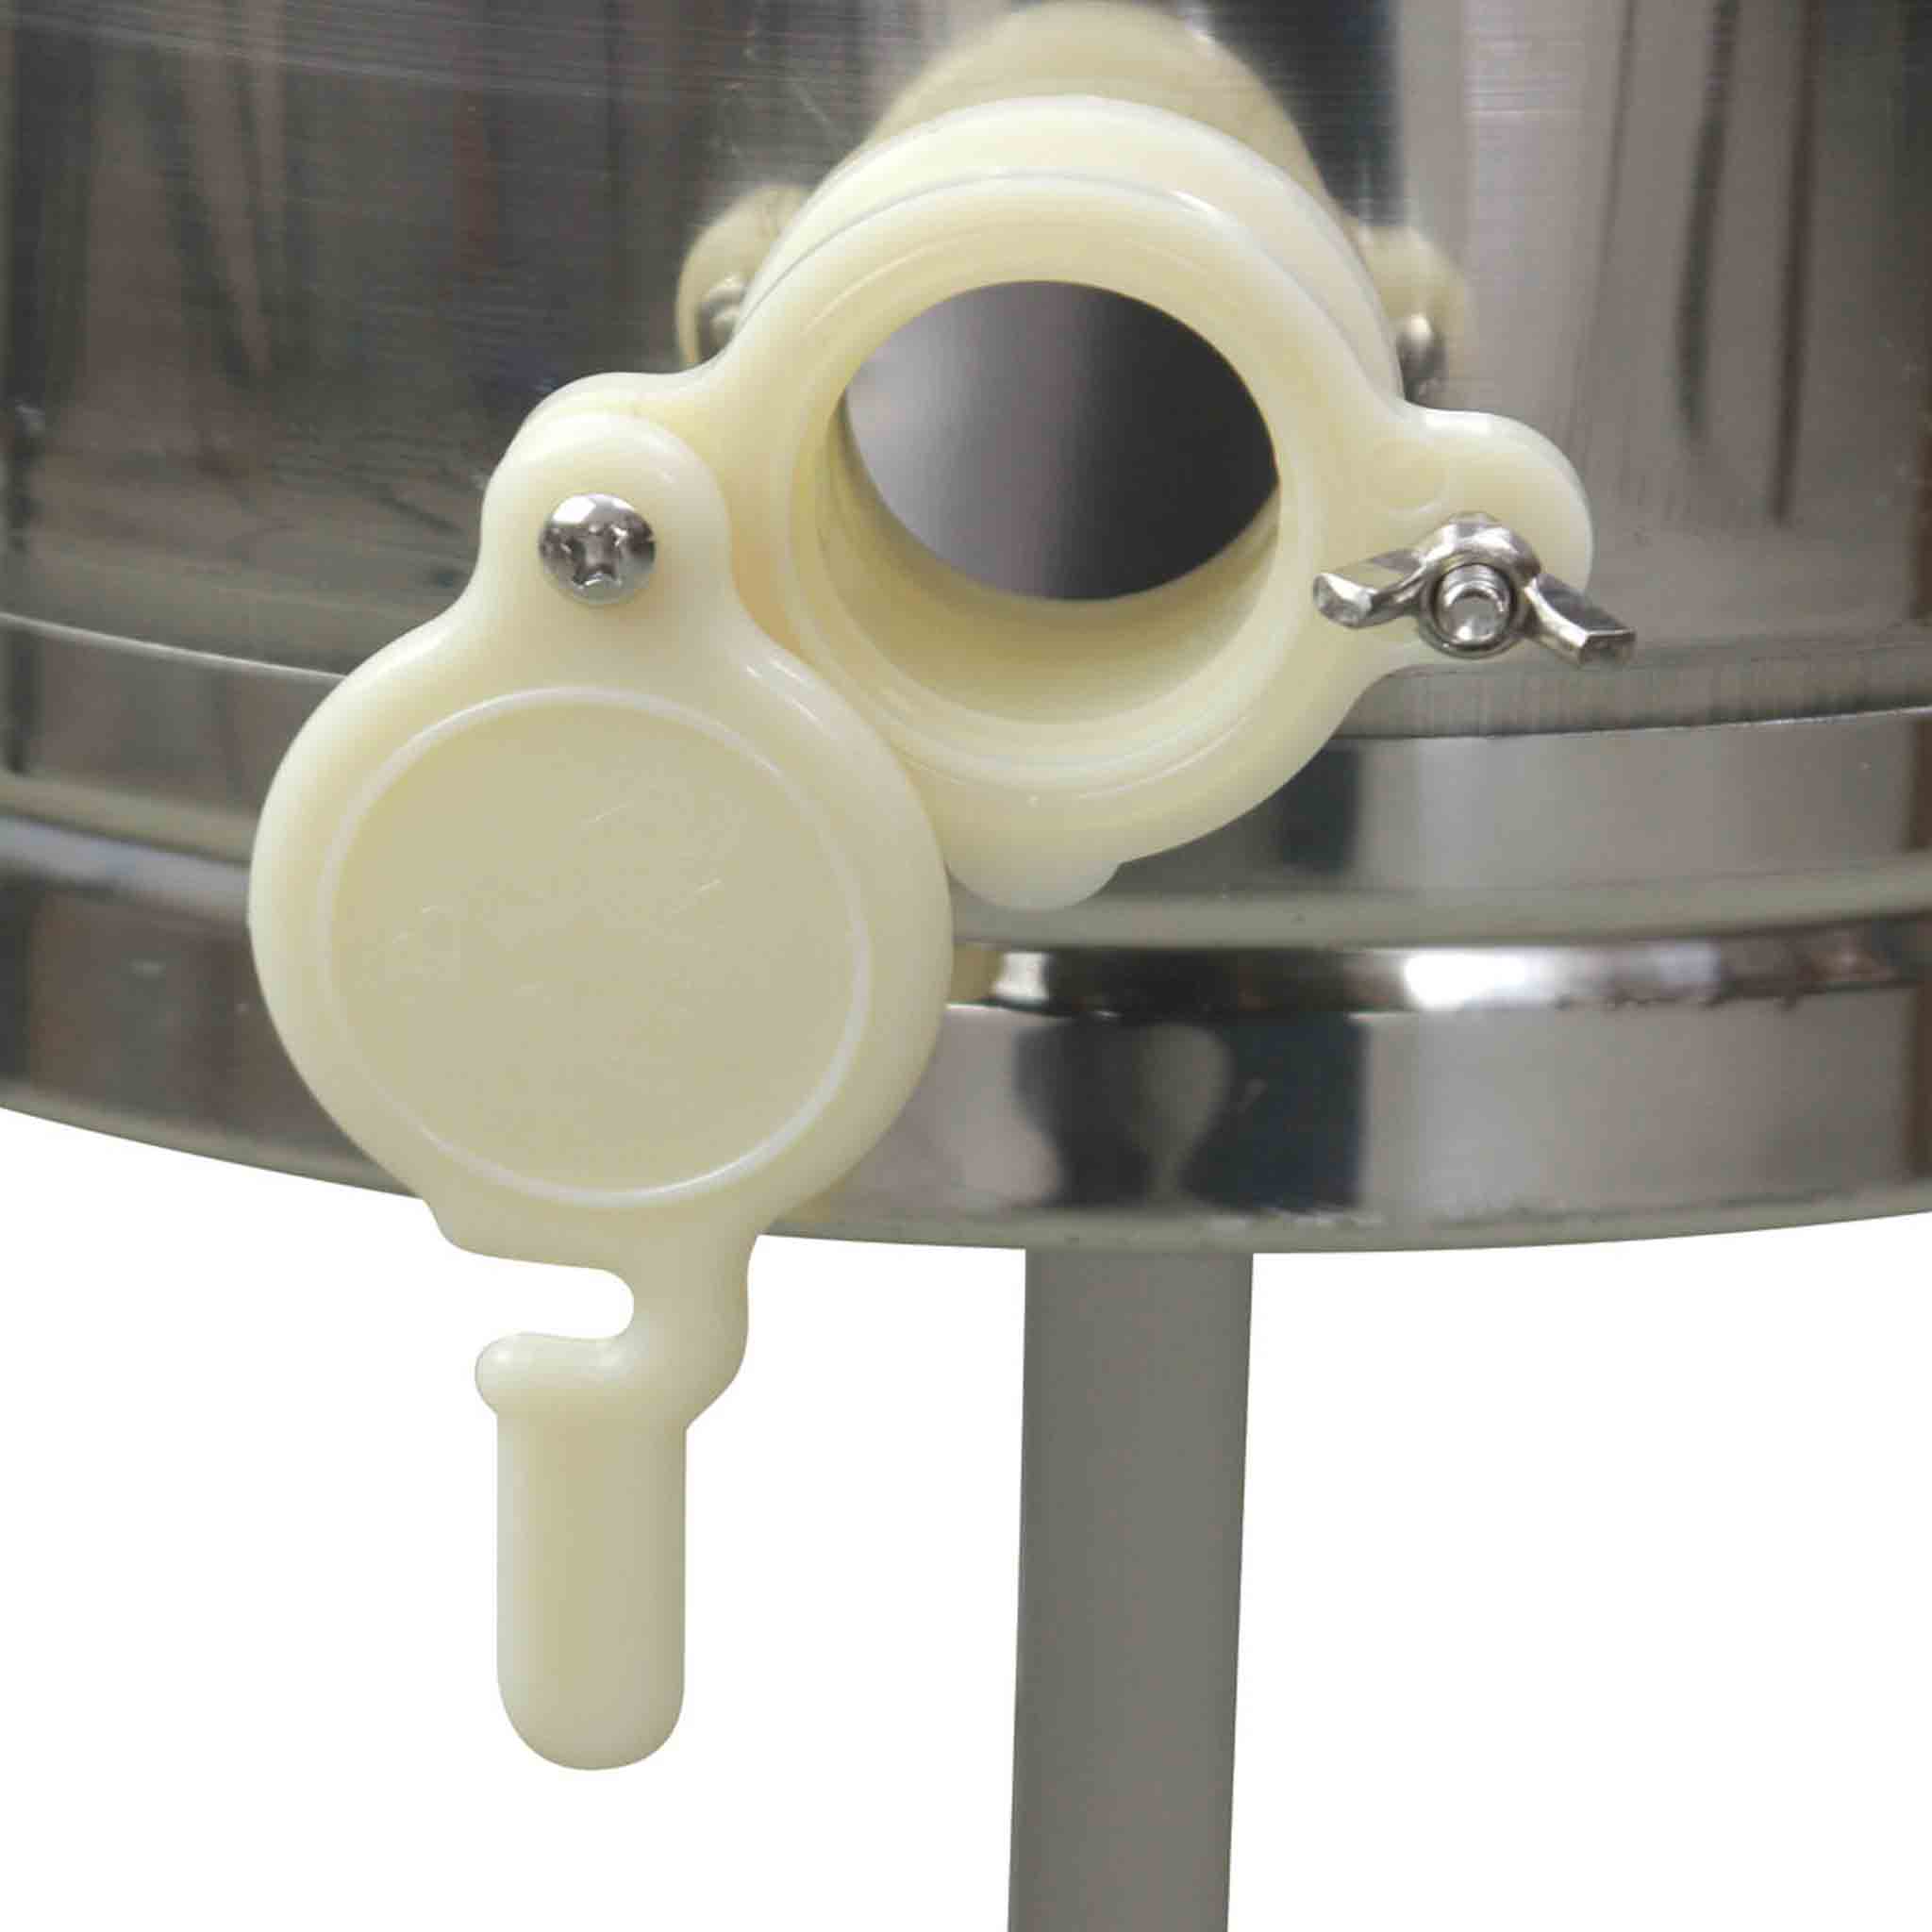 Buzzbee 2 Frame Manual Stainless Steel Honey Extractor - Honey Extractor collection by Buzzbee Beekeeping Supplies